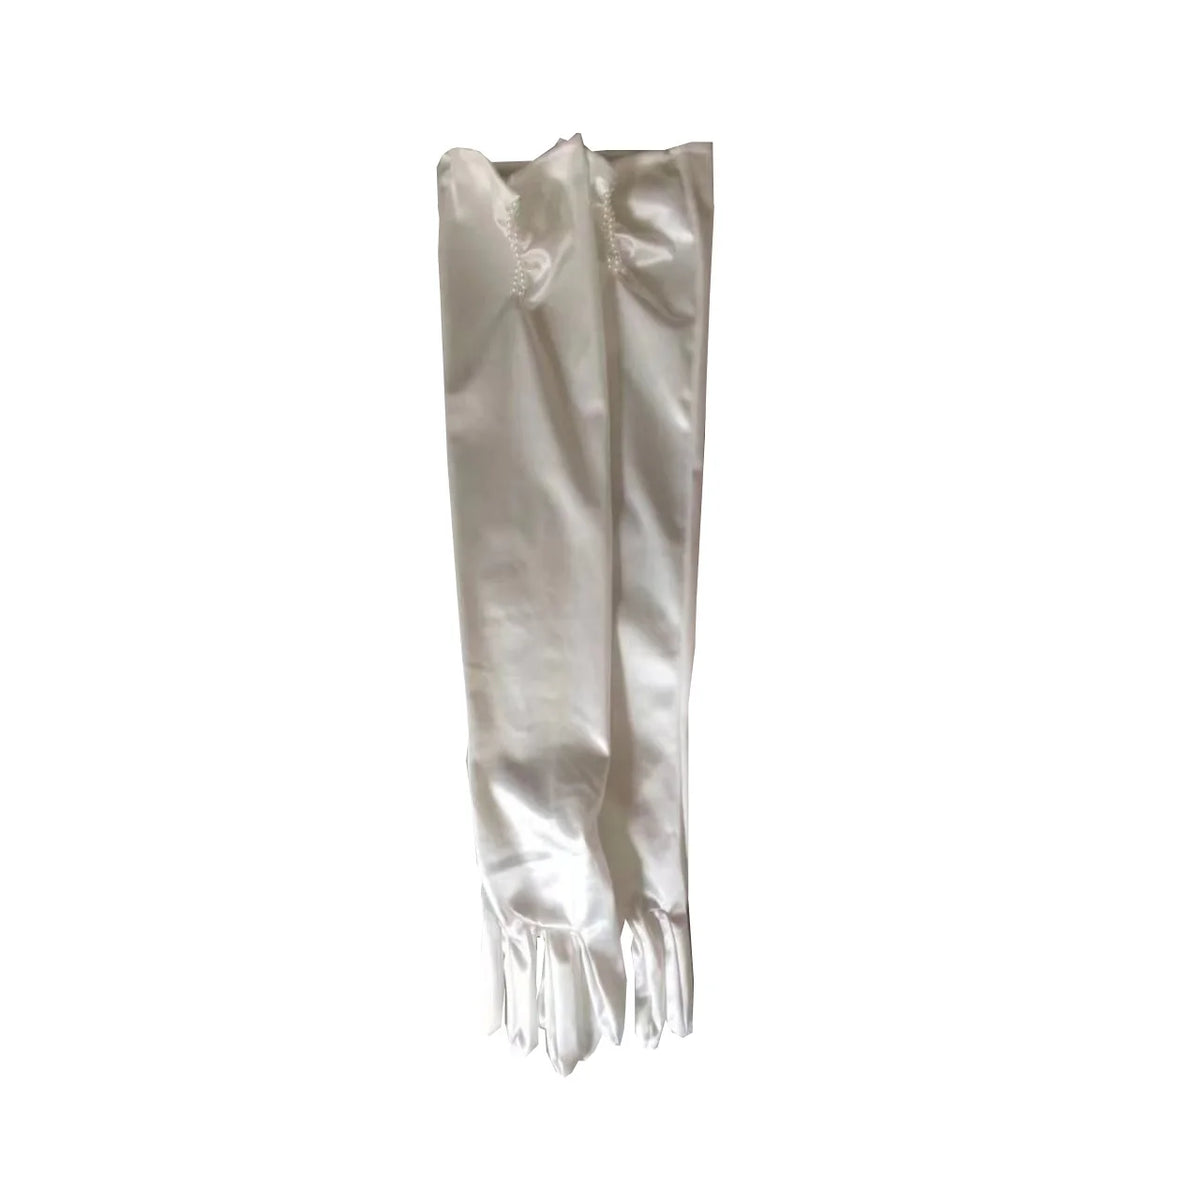 a pair of white gloves on a white background